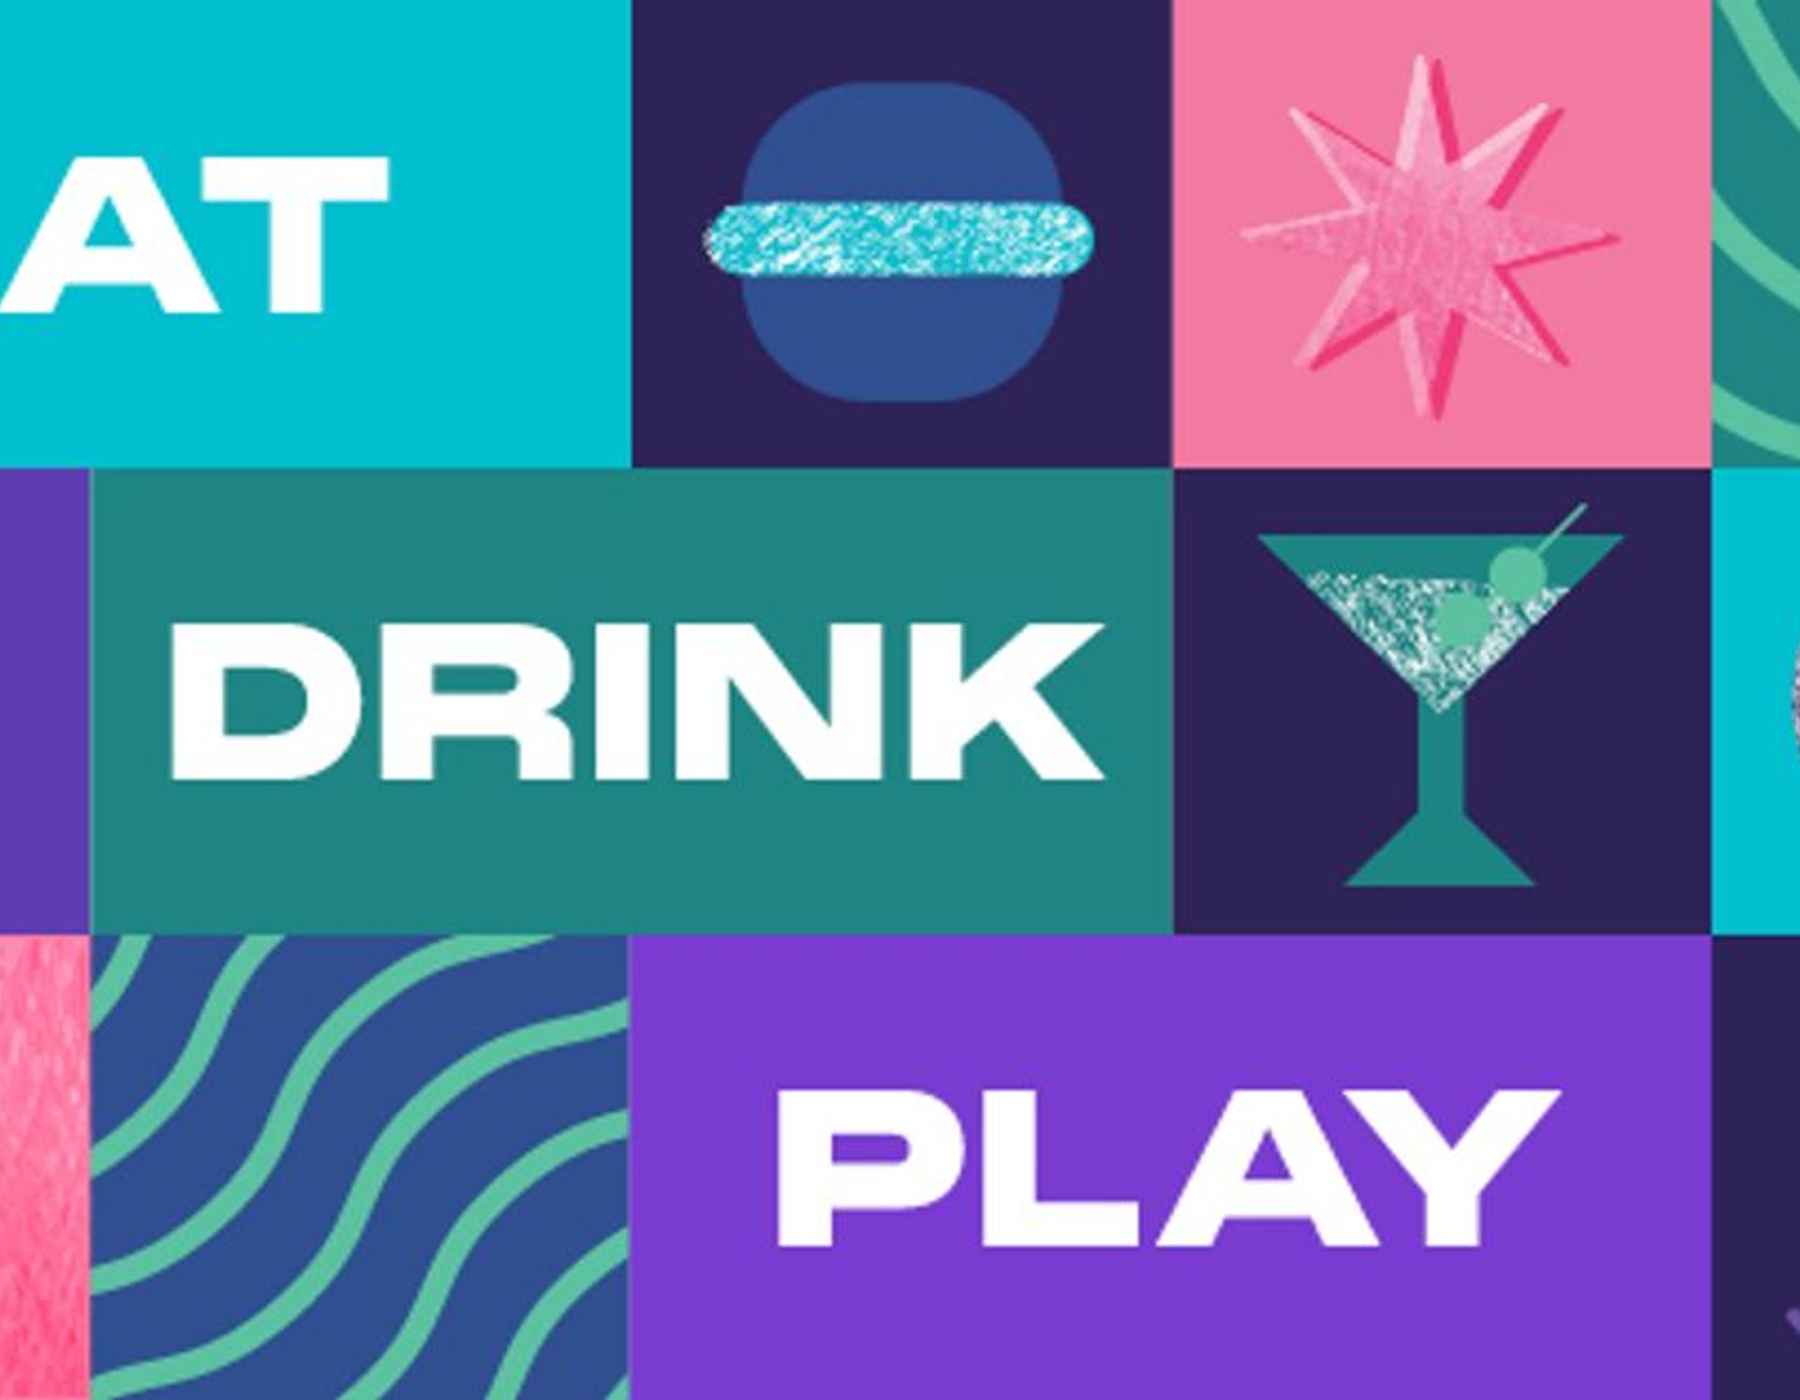 Feed your Soul at Eat, Drink, Play Wellington 2023